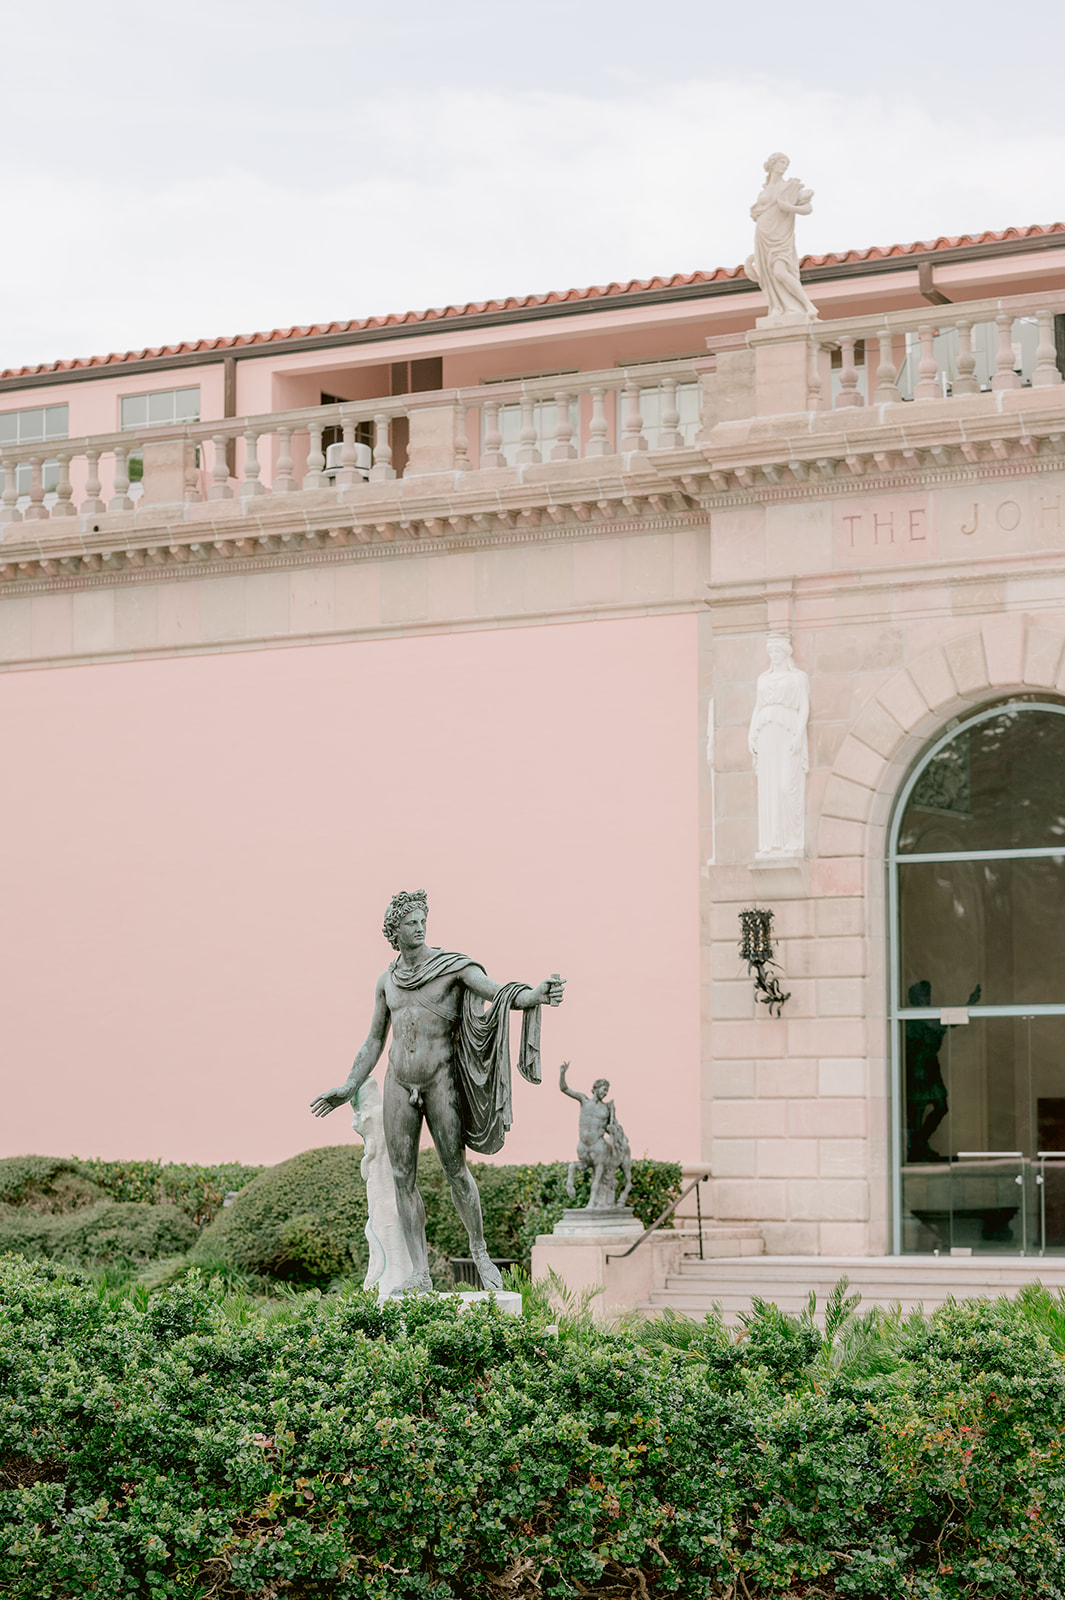 "Romantic engagement photo session at the John and Mable Ringling Museum"
